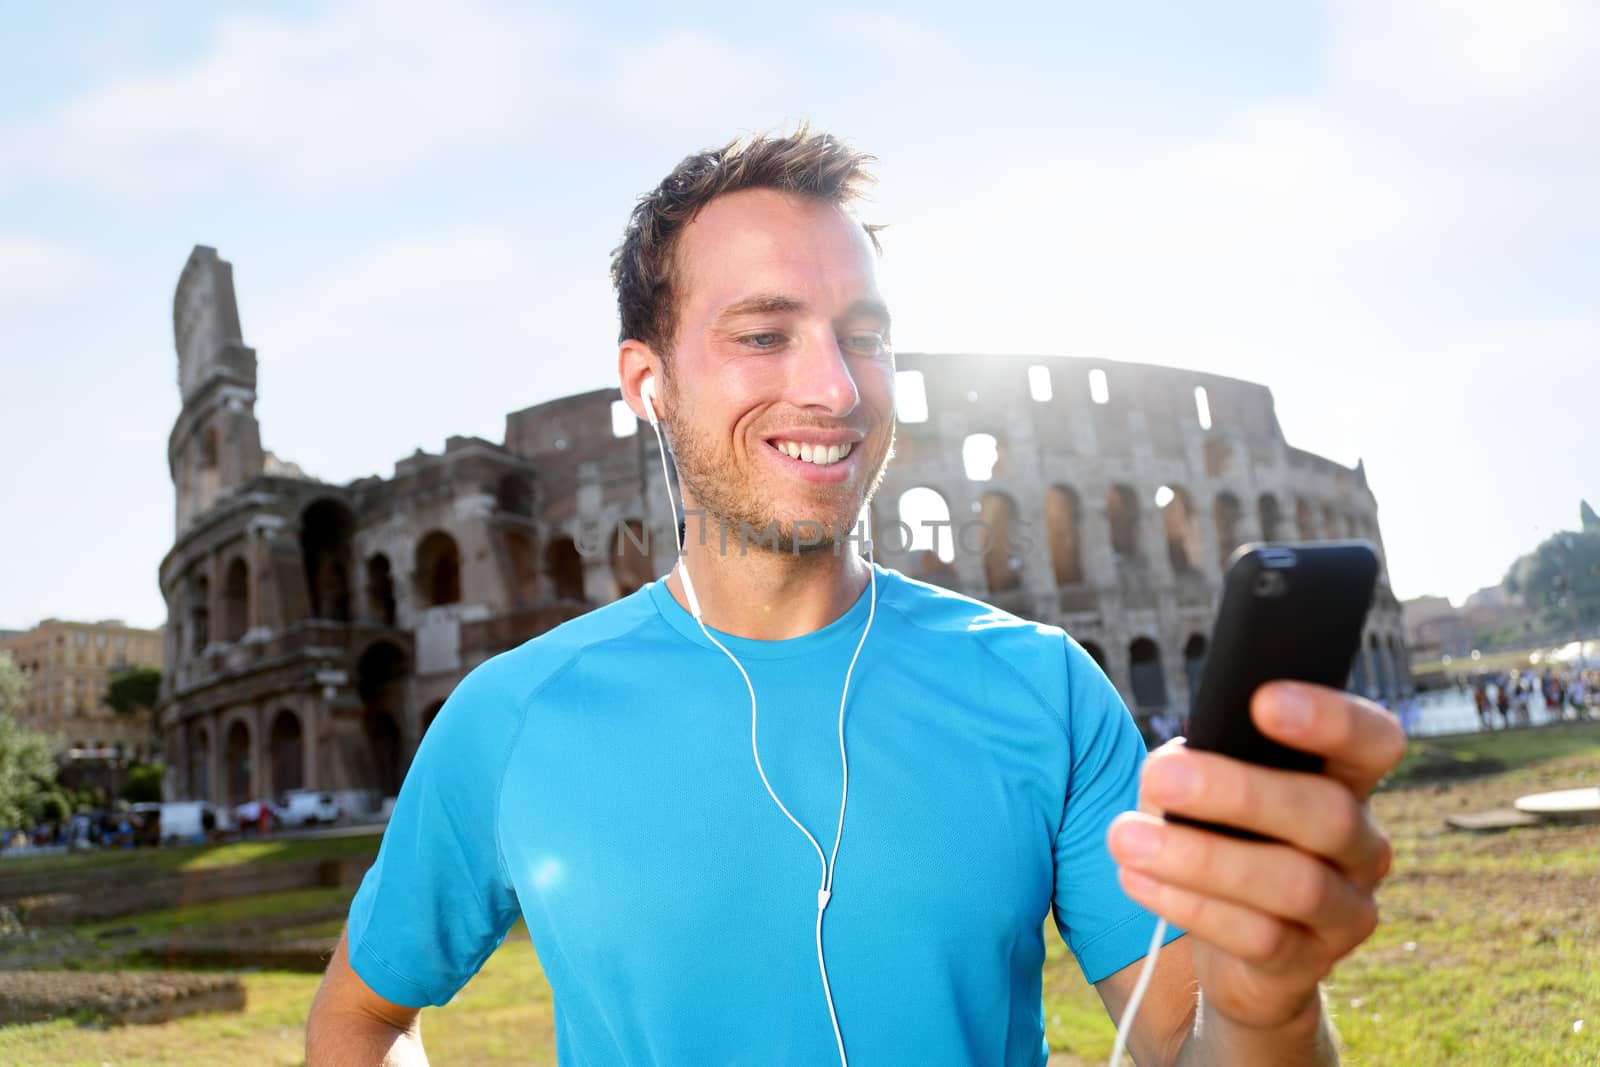 Happy male jogger listening music on smartphone against Colosseum. Smiling man is in sportswear. Handsome fit runner is enjoying music before workout on sunny day.